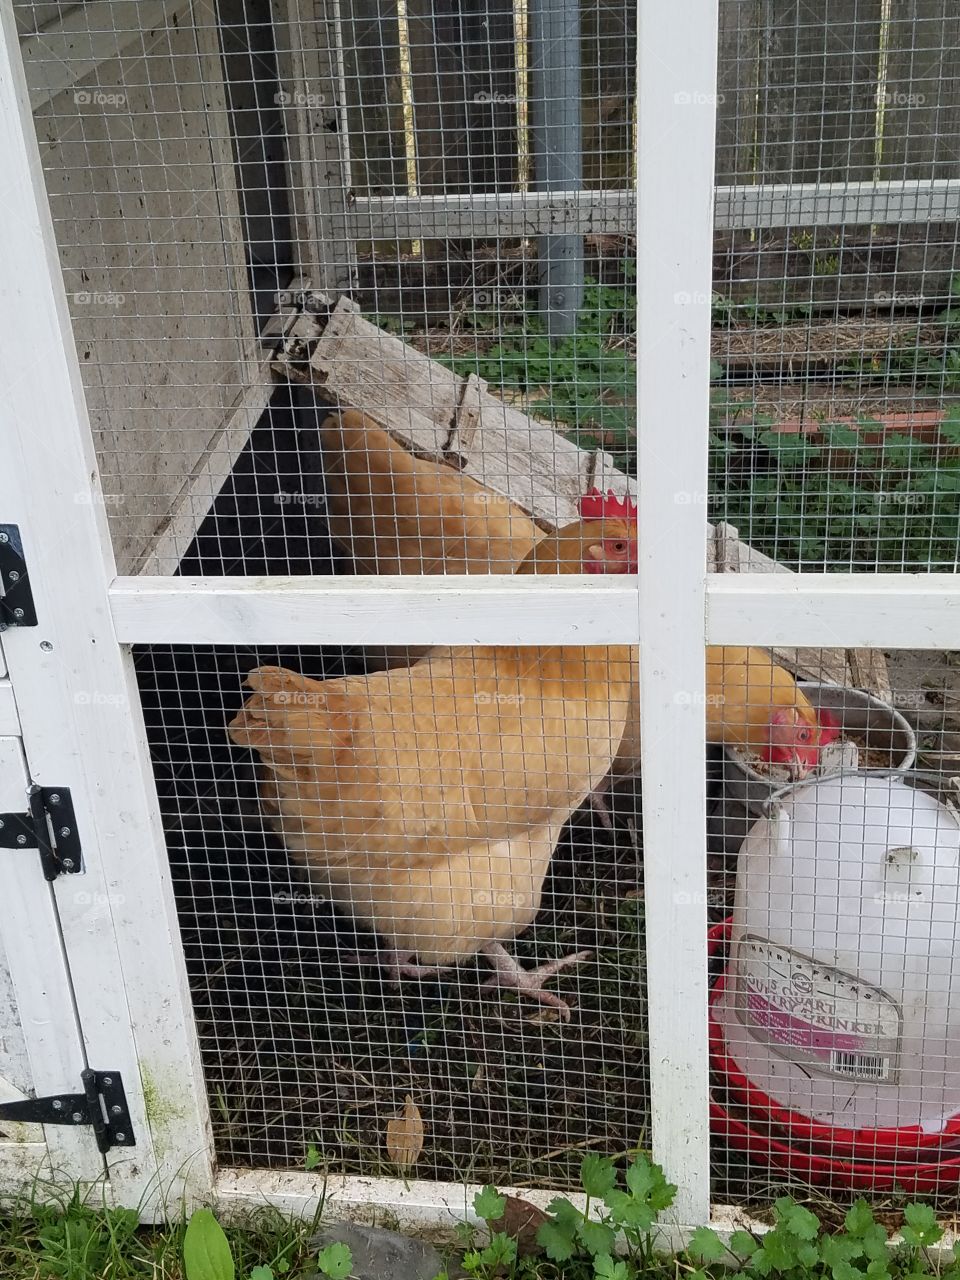 chickens in the coop